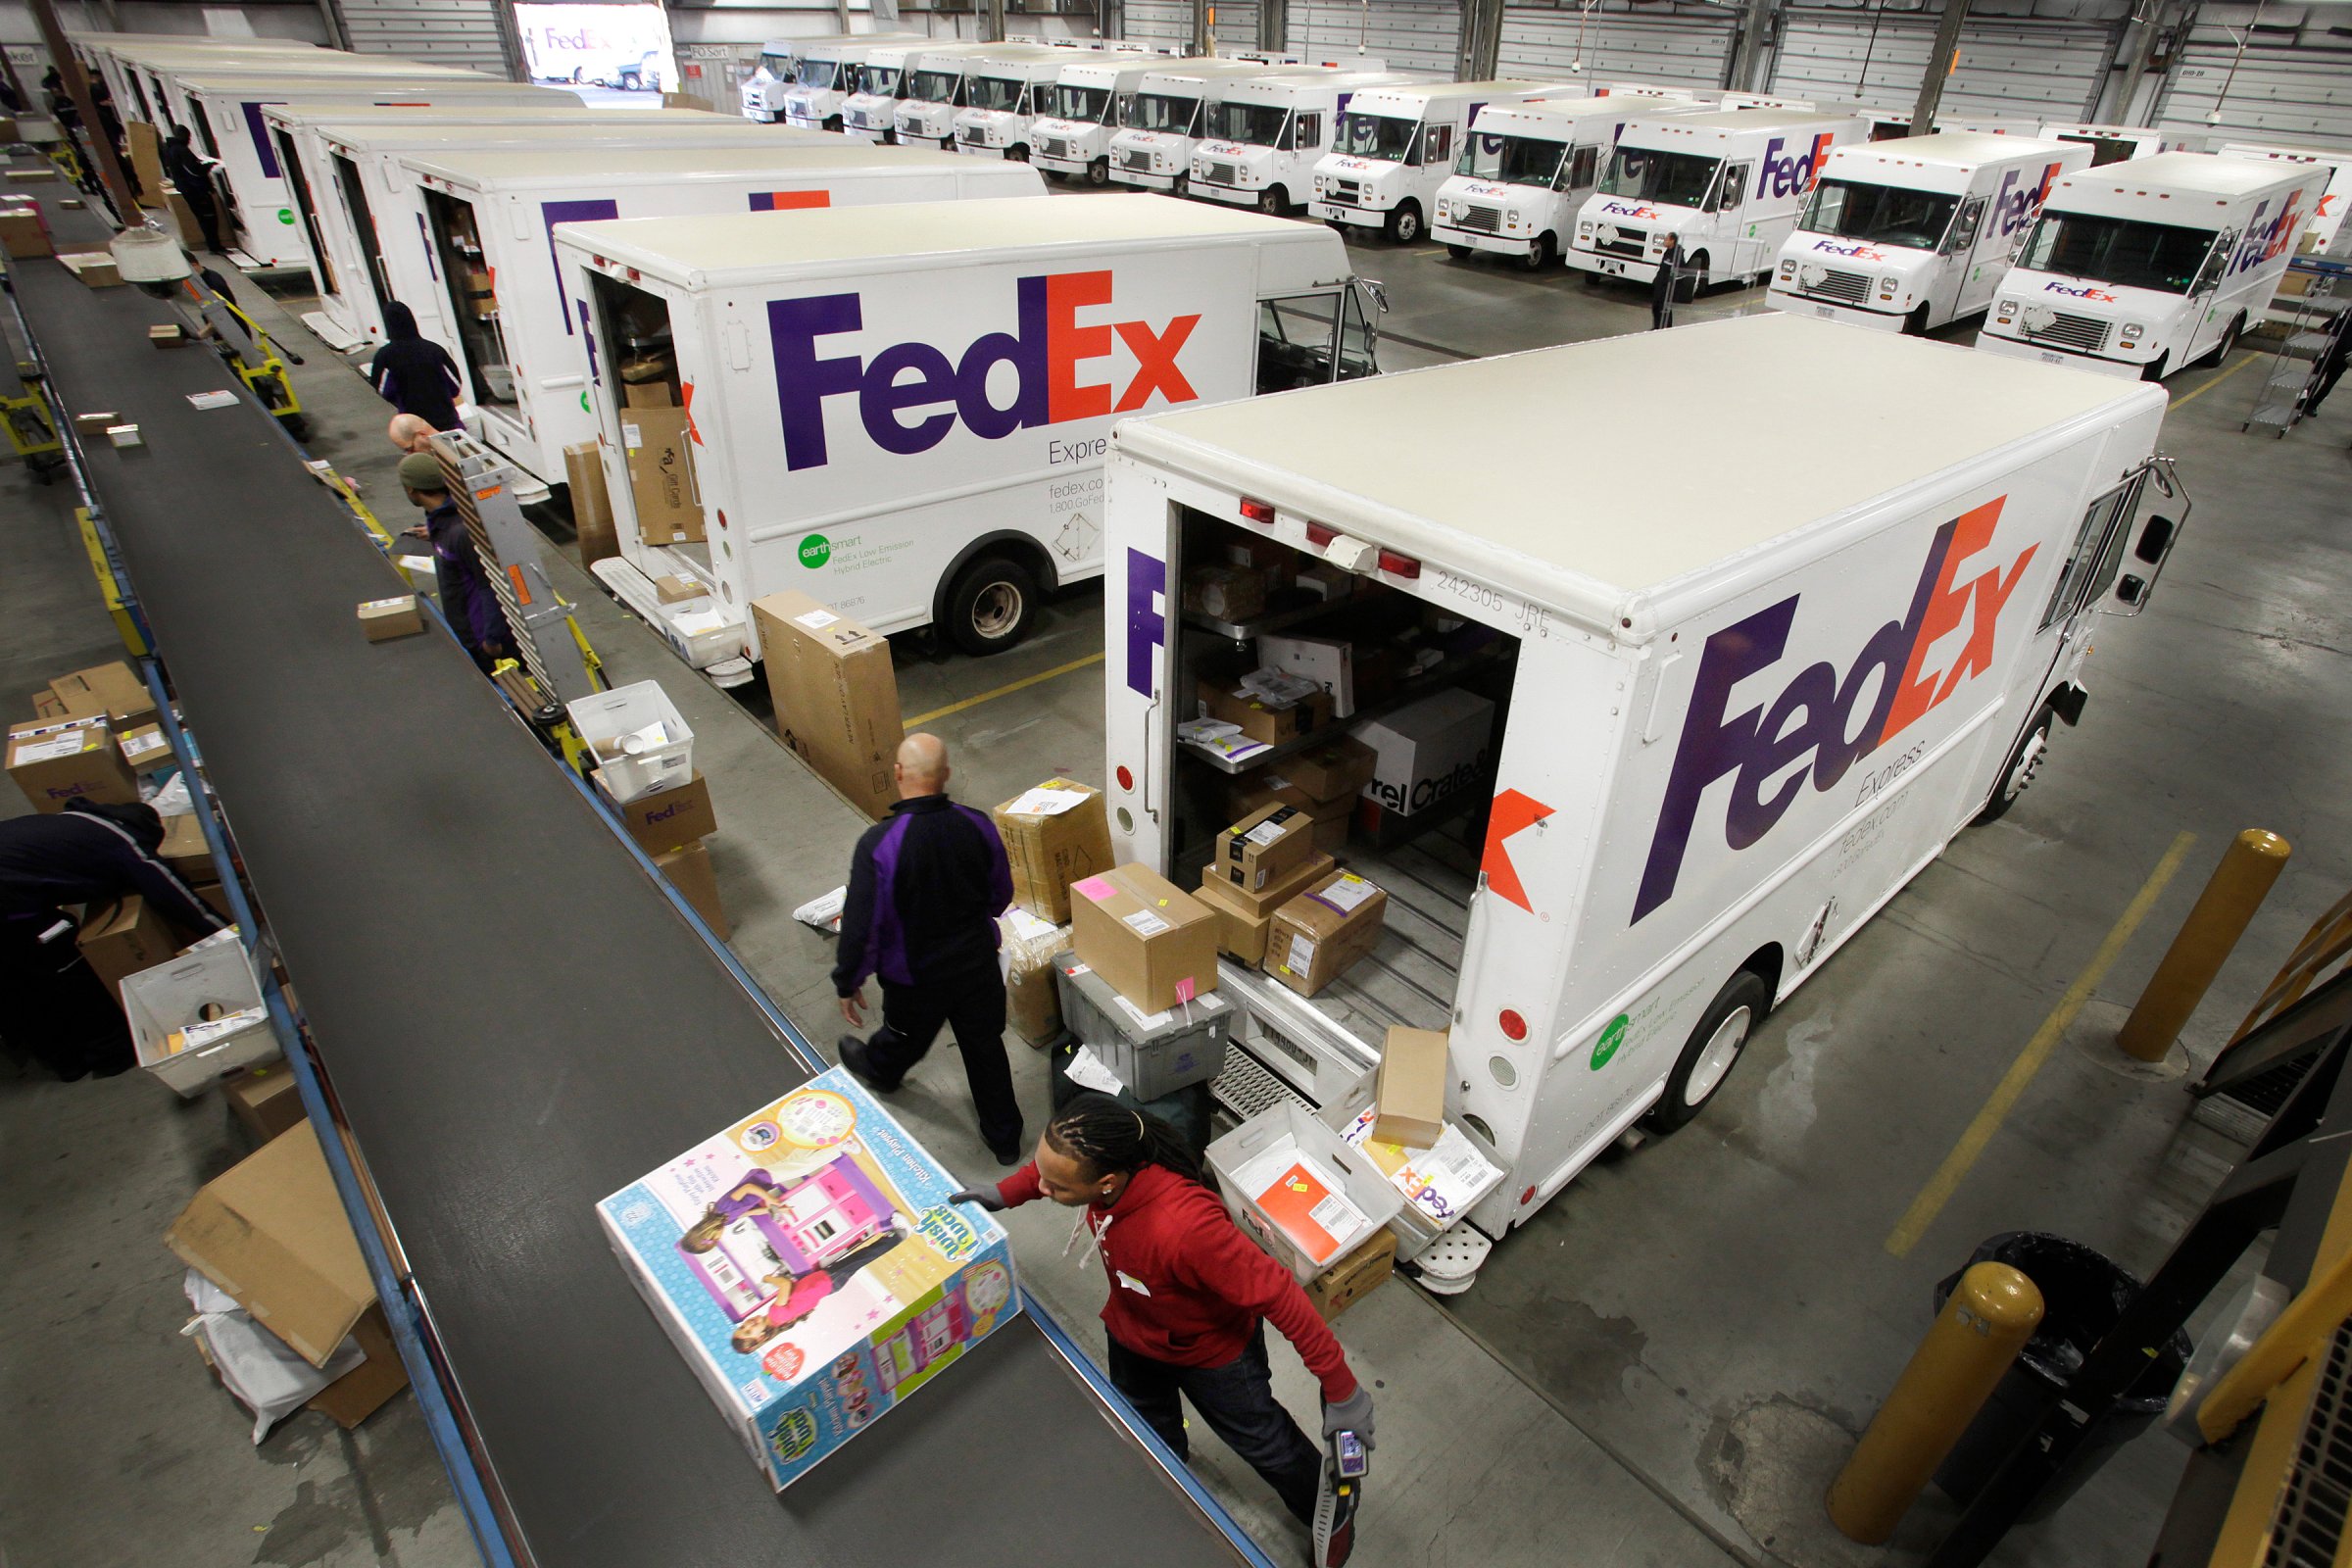 FedEx employees fill their trucks for deliveries at a FedEx sorting facility in the Bronx, New York on Dec. 15, 2014.